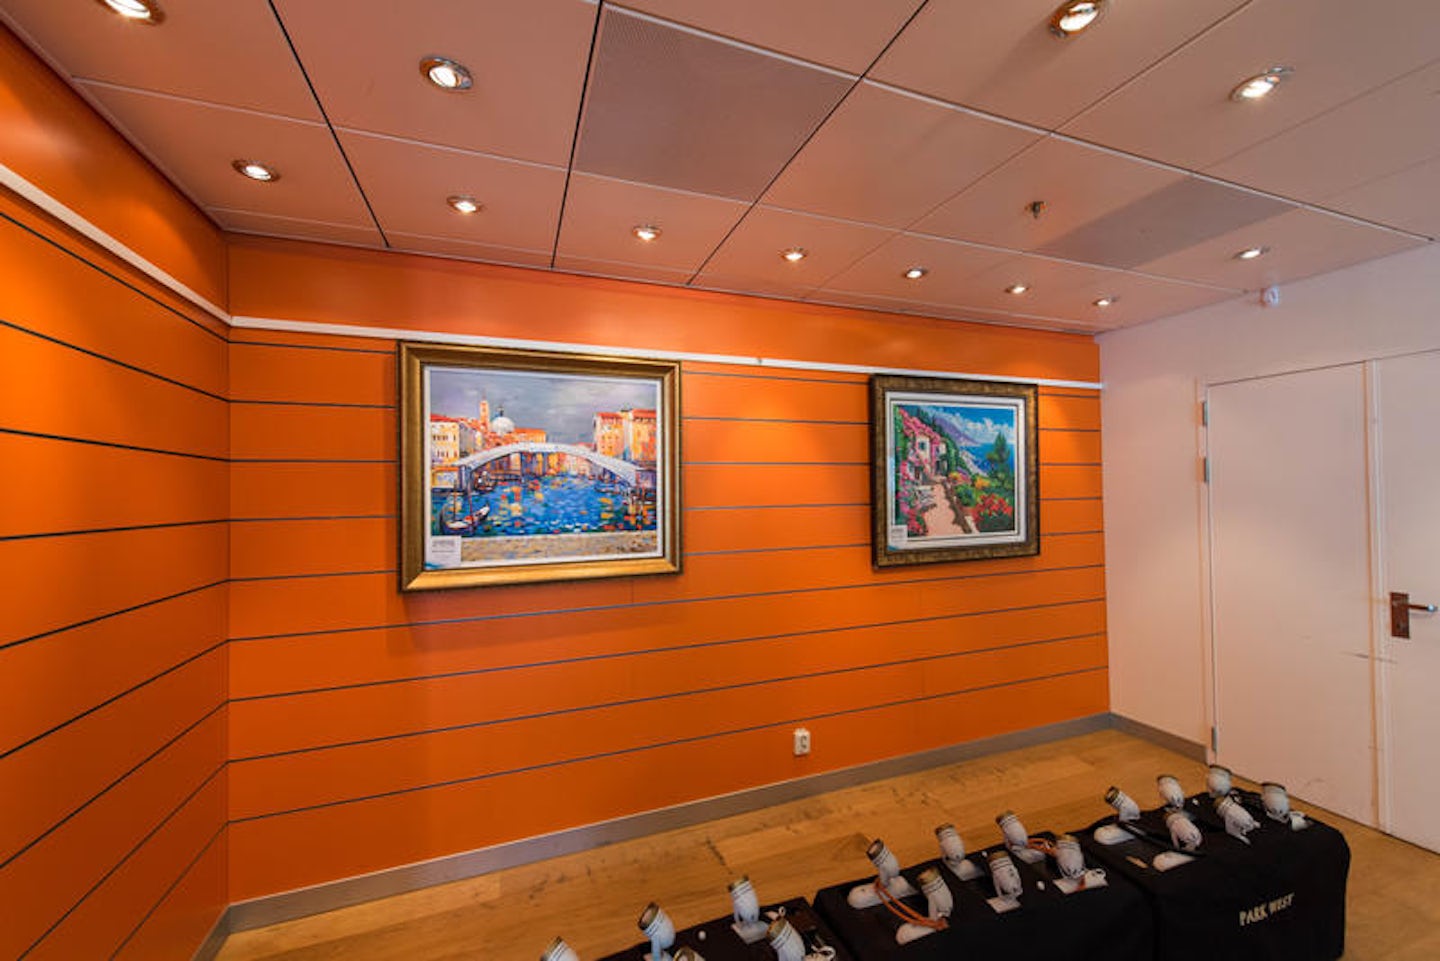 Parkside Gallery on Oasis of the Seas